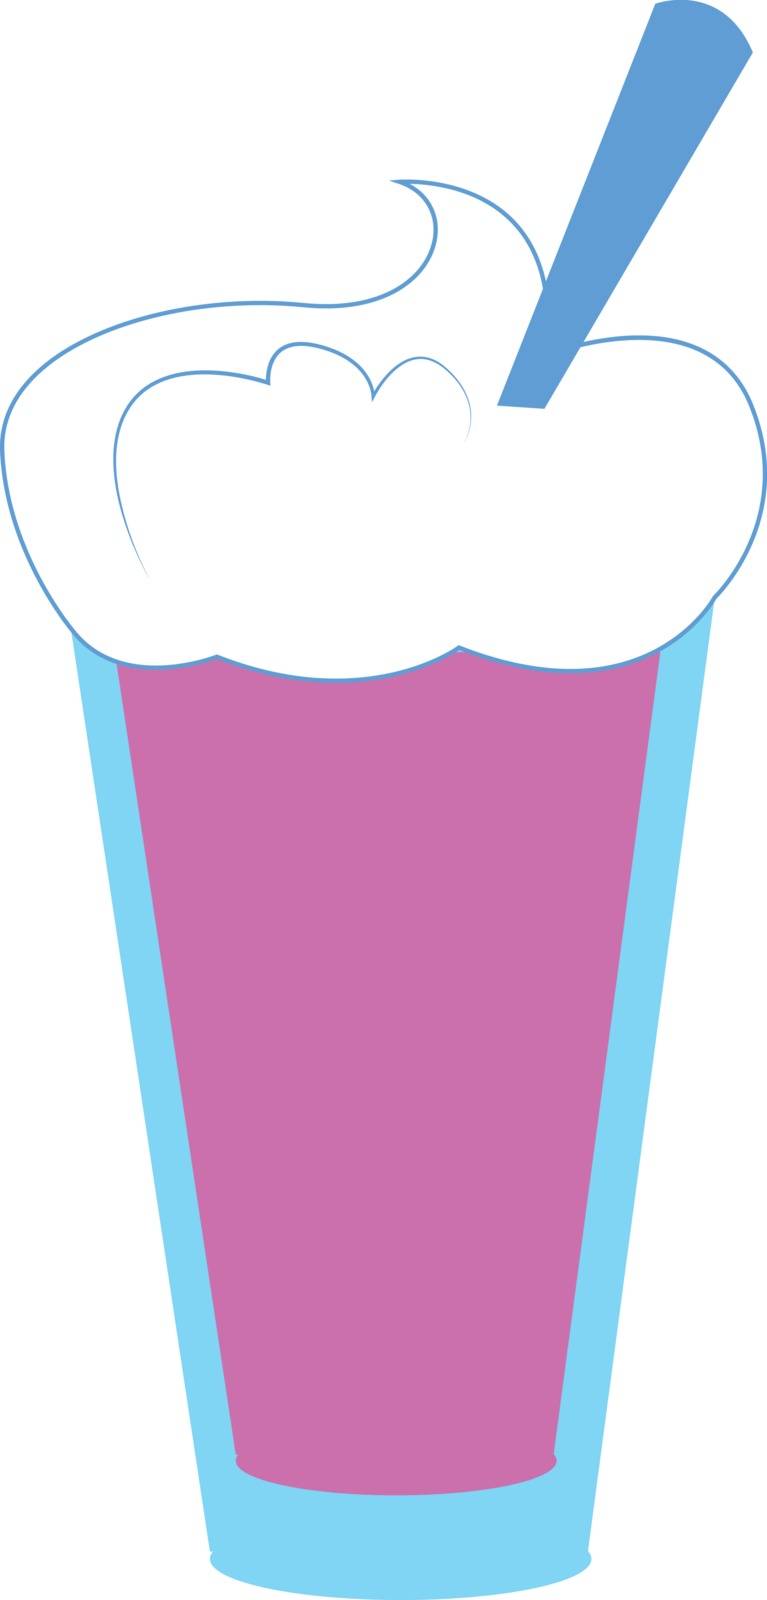 Pink drink in a blue glass with froth on top and a spoon inside the glass, vector, color drawing or illustration. 